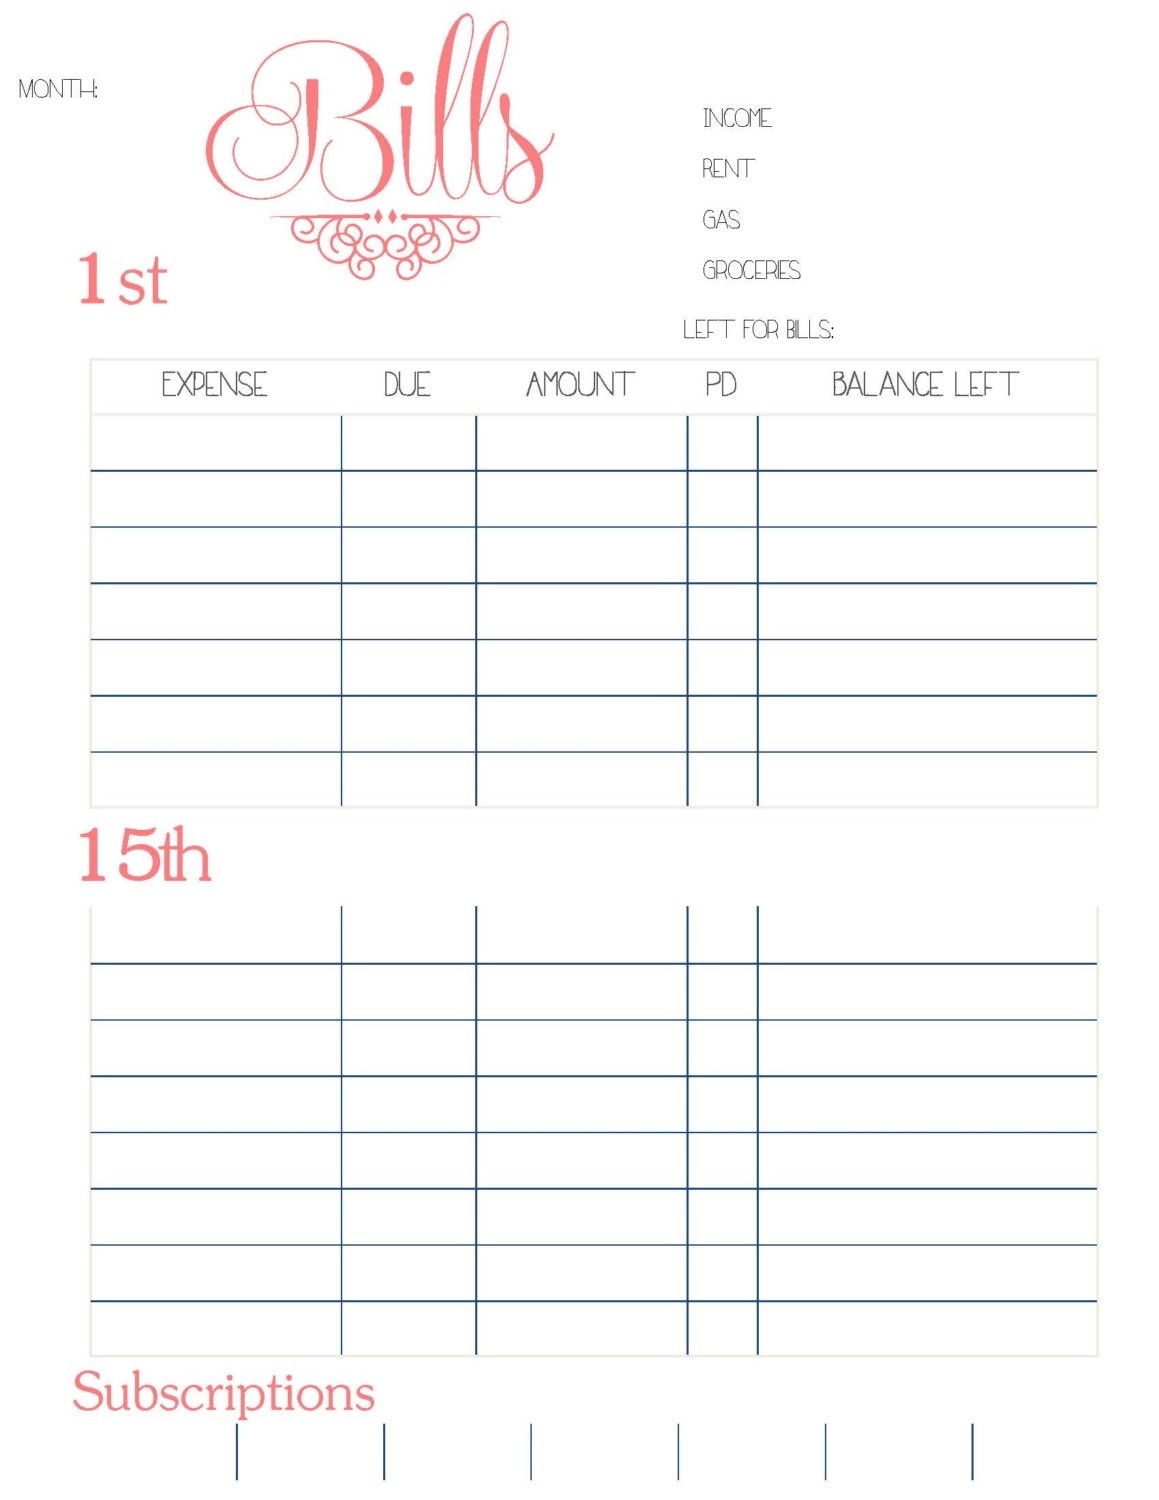 Monthly Bill Organizer - Akali  Free Blank Printable Monthly Bill Template